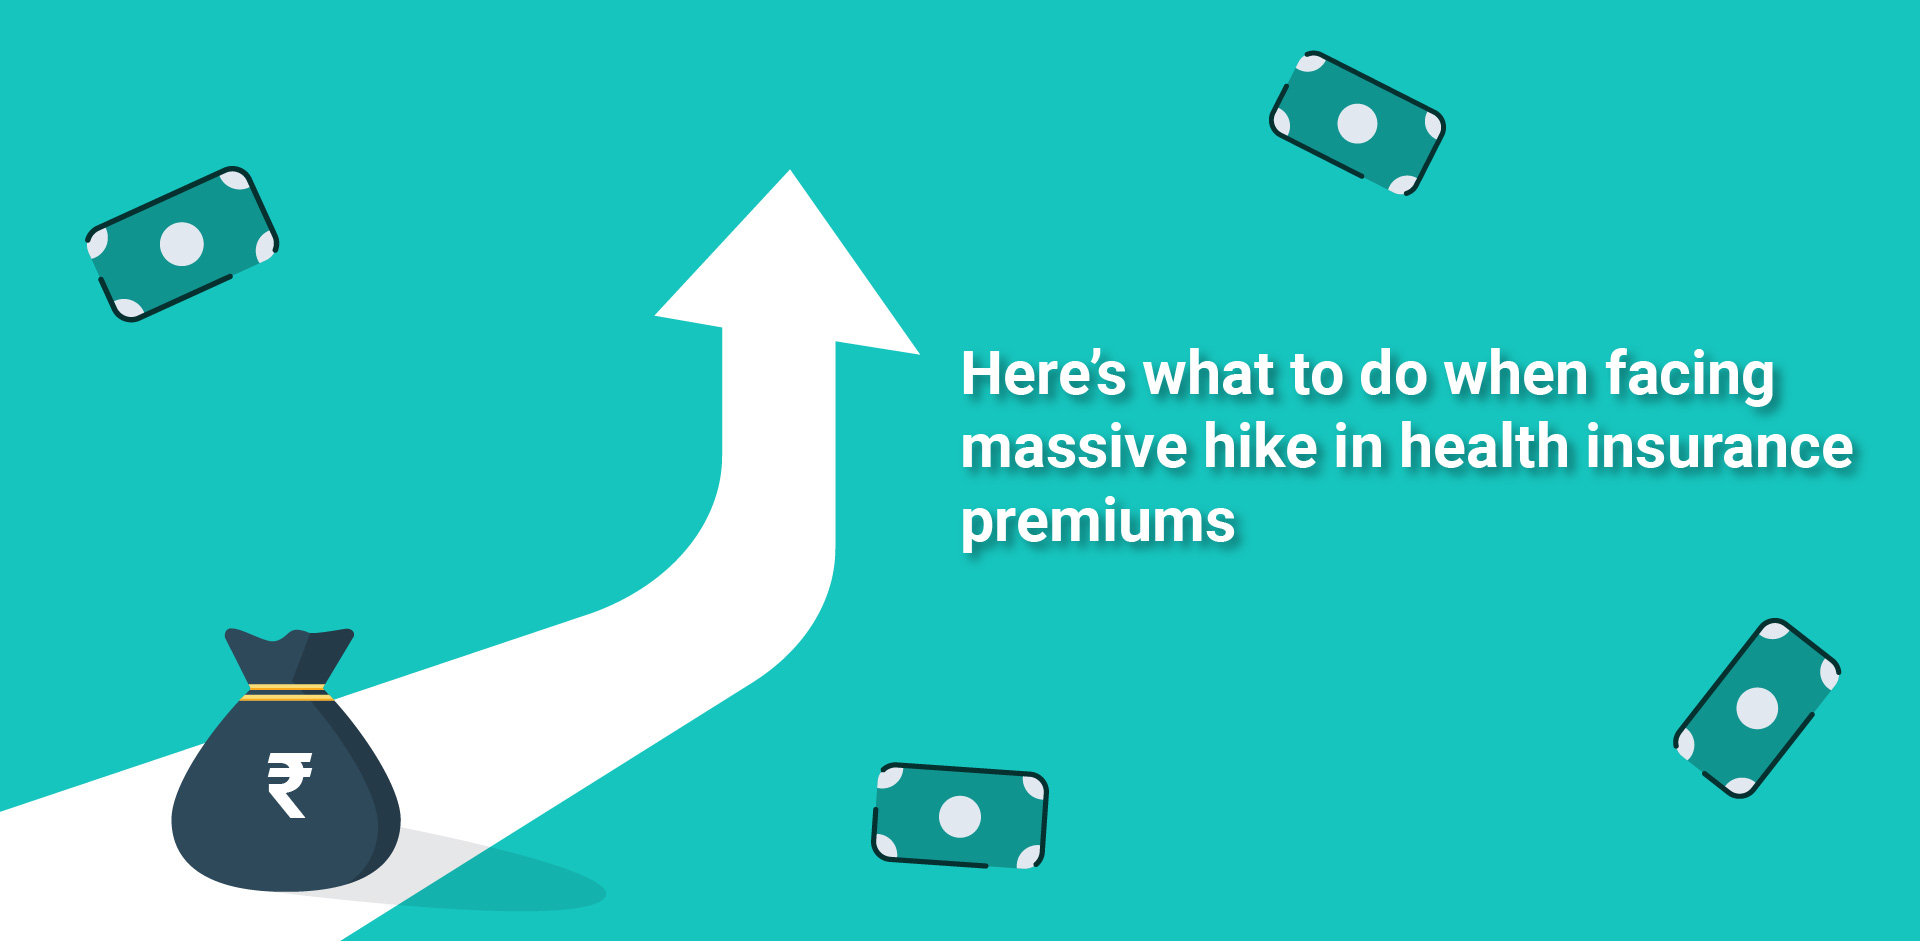 Here’s what to do when facing massive hike in health insurance premiums